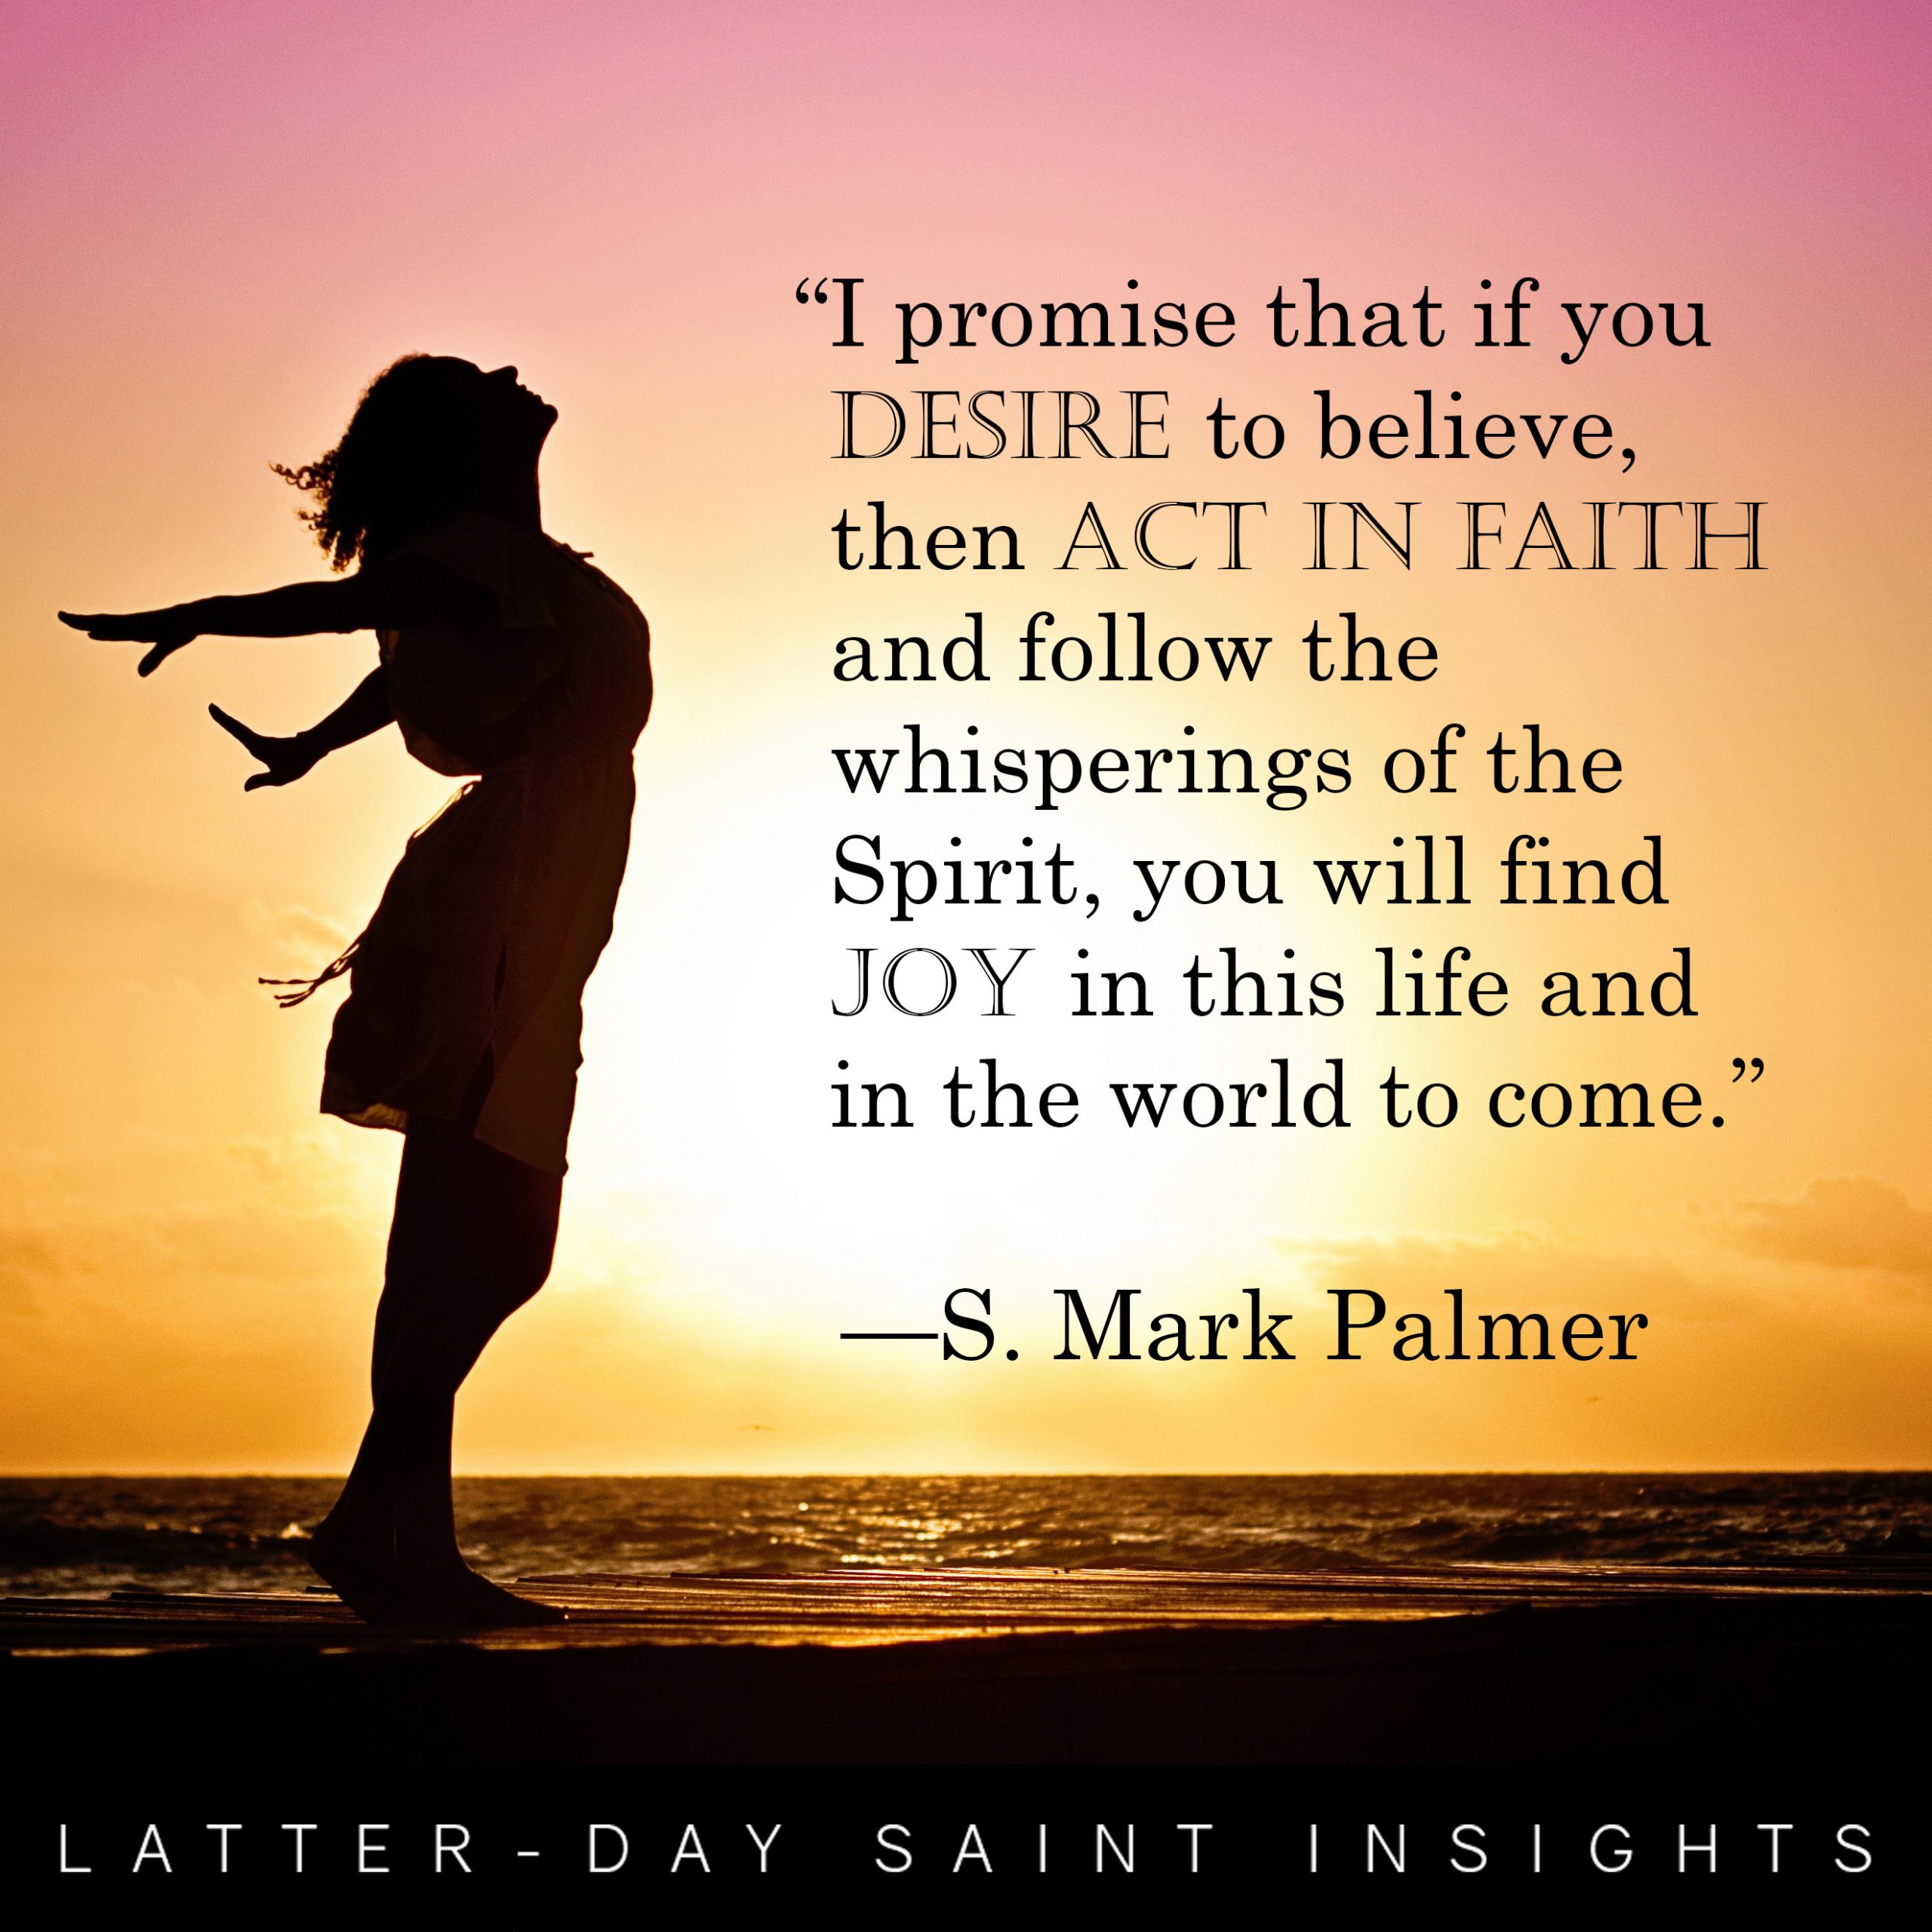 “I promise that if you desire to believe, then act in faith and follow the whisperings of the Spirit, you will find joy in this life and in the world to come.” –S. Mark Palmer